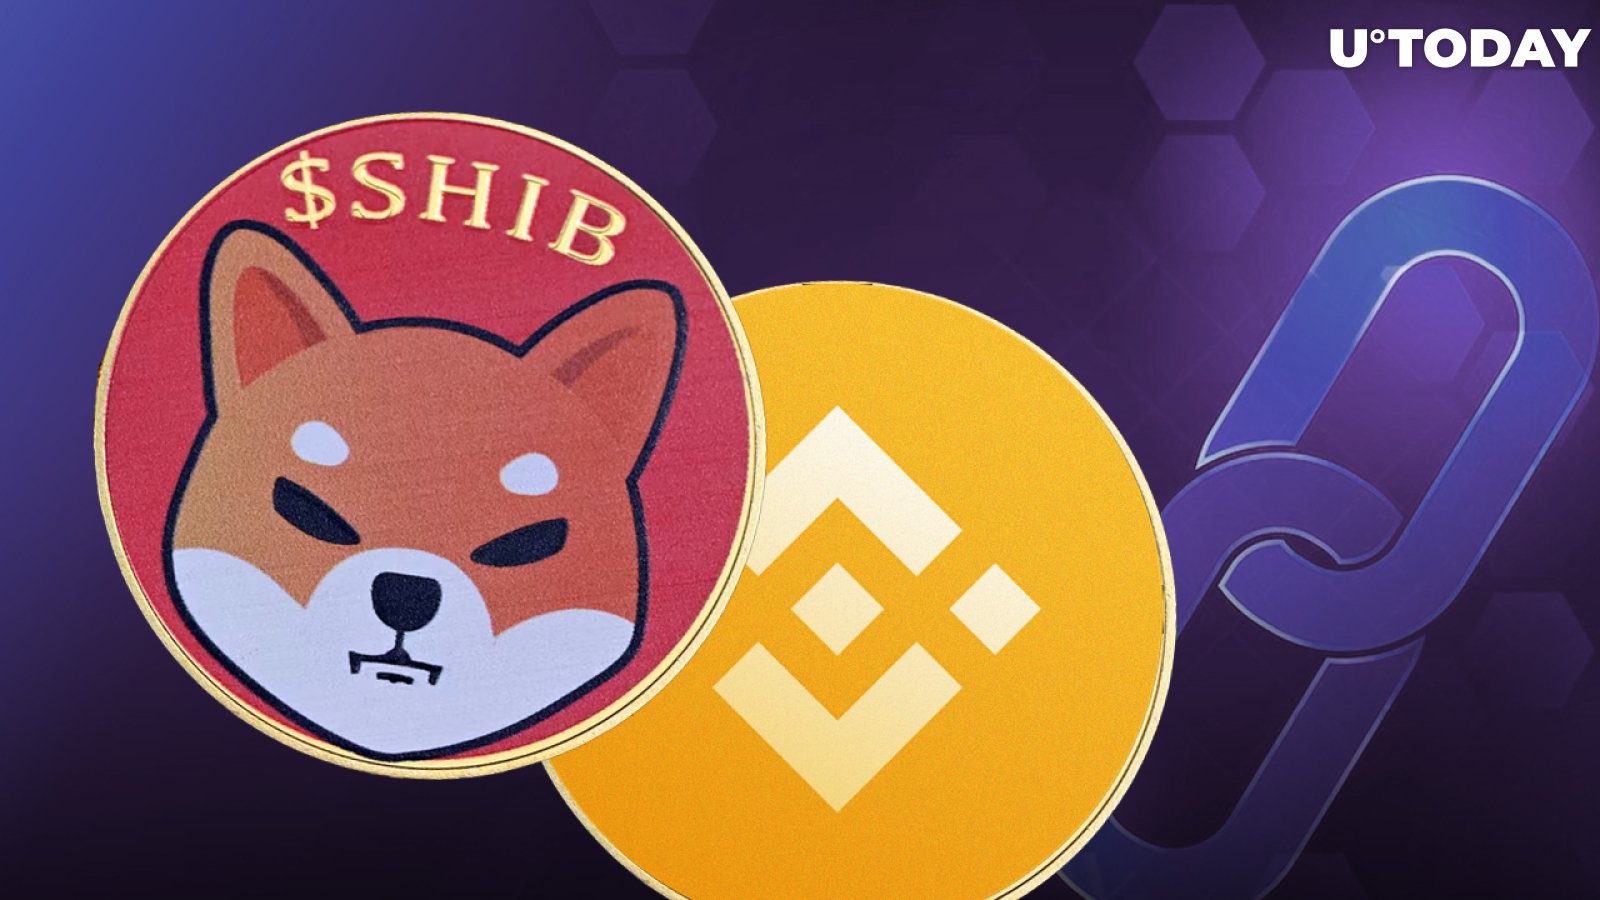 SHIB Wrapped on BNB Chain Can Now Be Used for Payments via This Company: Report